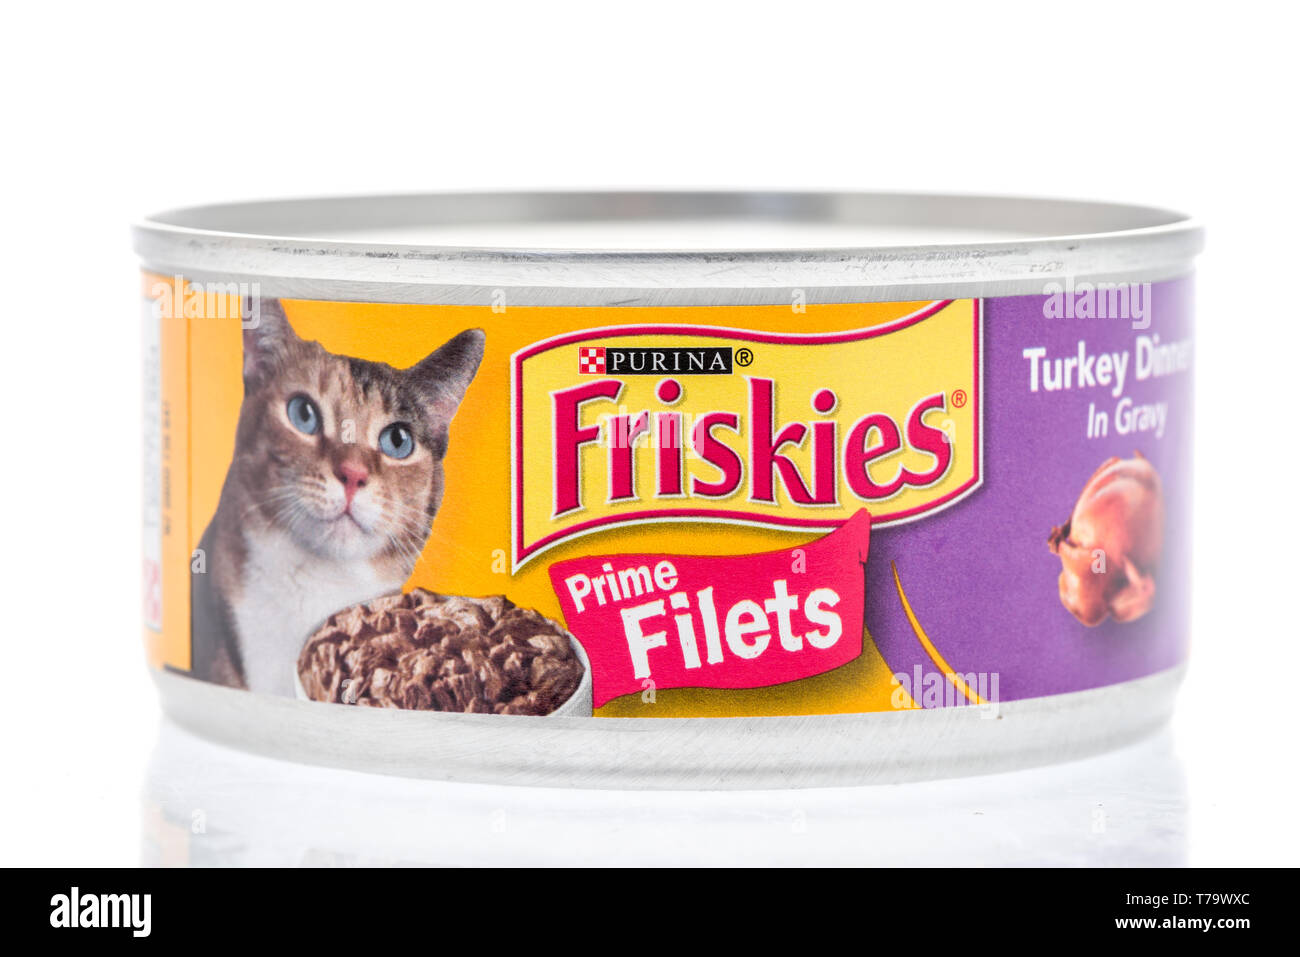 Winneconne, WI -  26 April 2019: A package of Purina frikies prime filets turkey dinner cat food on an isolated background Stock Photo